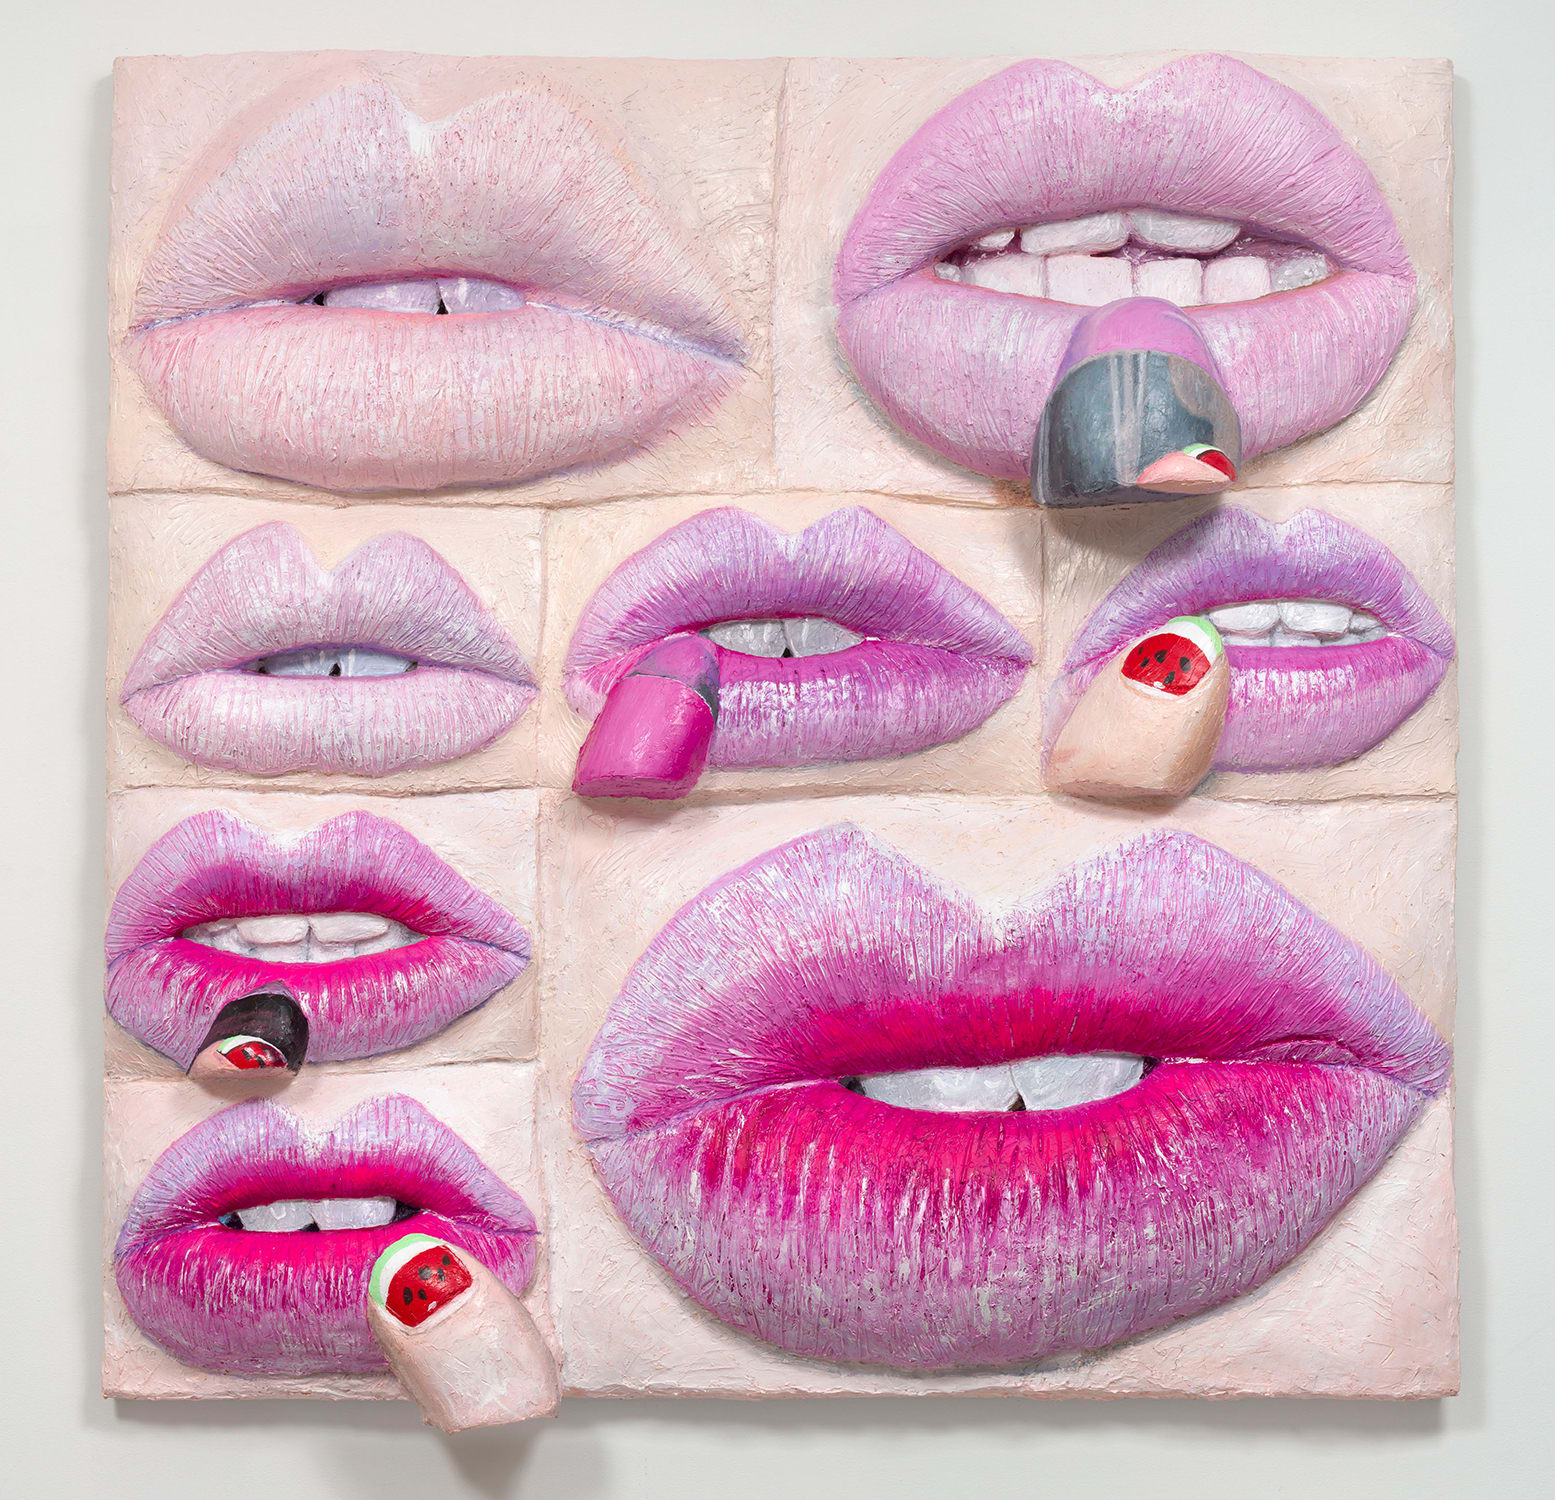 Gina Beavers, Pink Ombre Lip, 2019, presented at Art Basel Miami Beach 2019 by Marianne Boesky Gallery, New York City and Aspen.